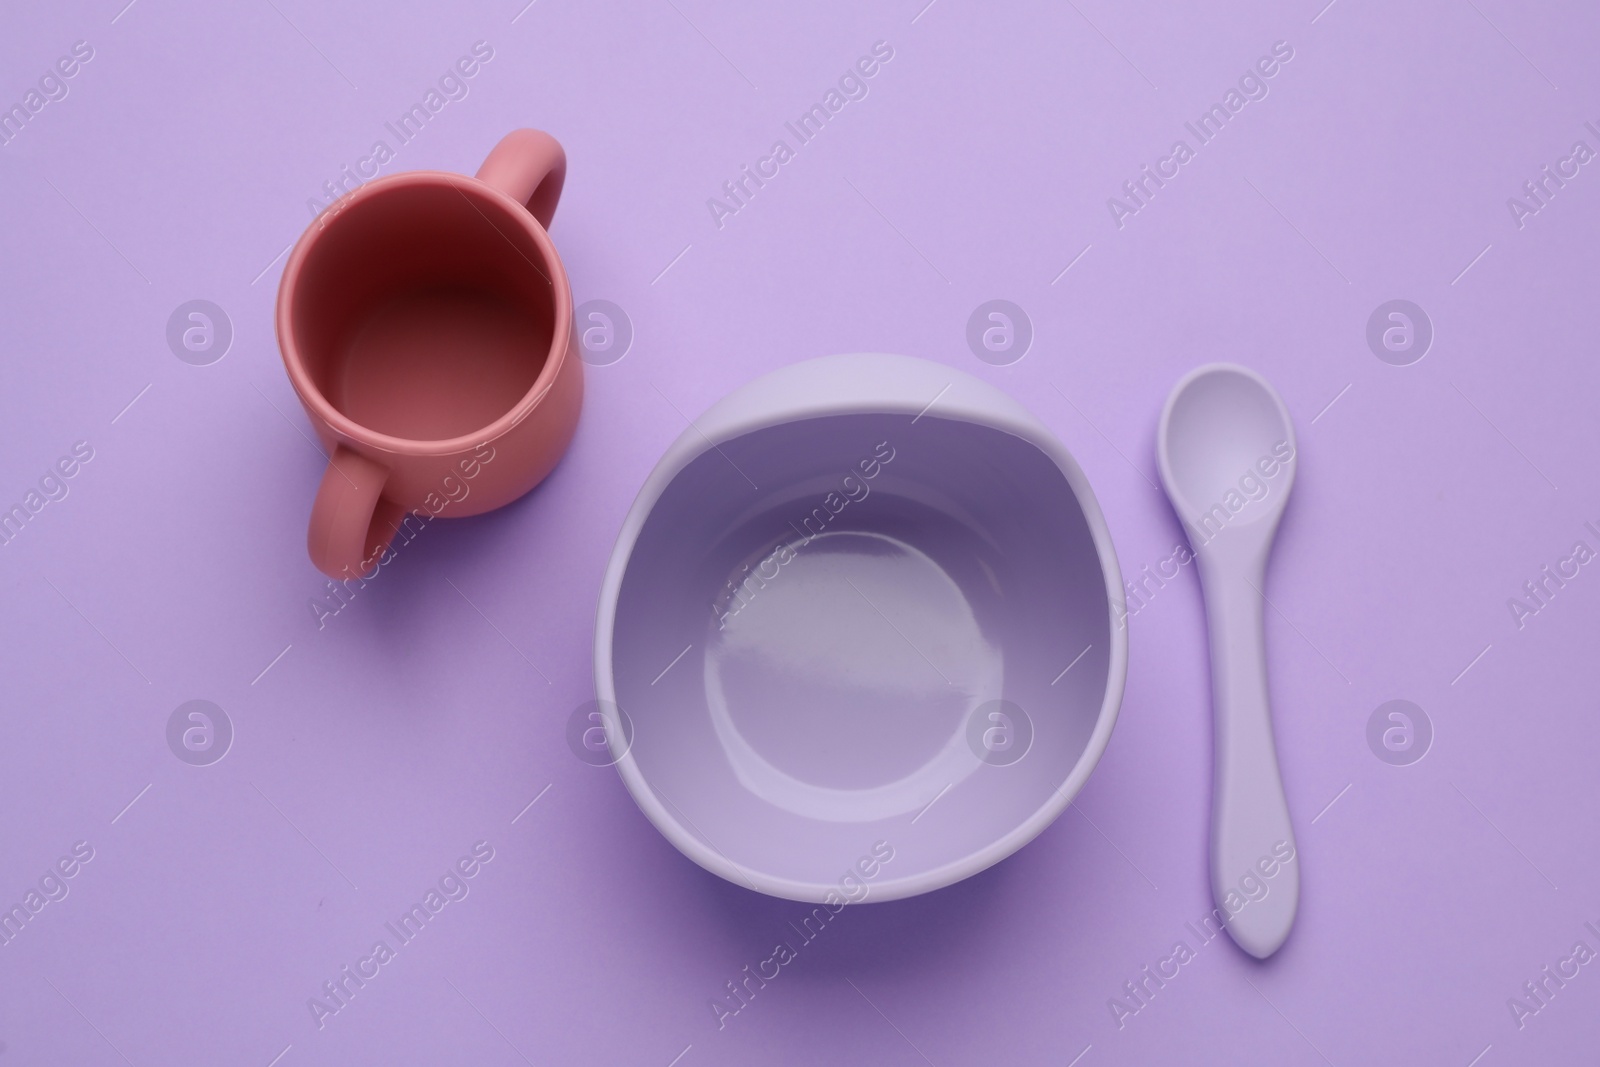 Photo of Set of plastic dishware on violet background, flat lay. Serving baby food